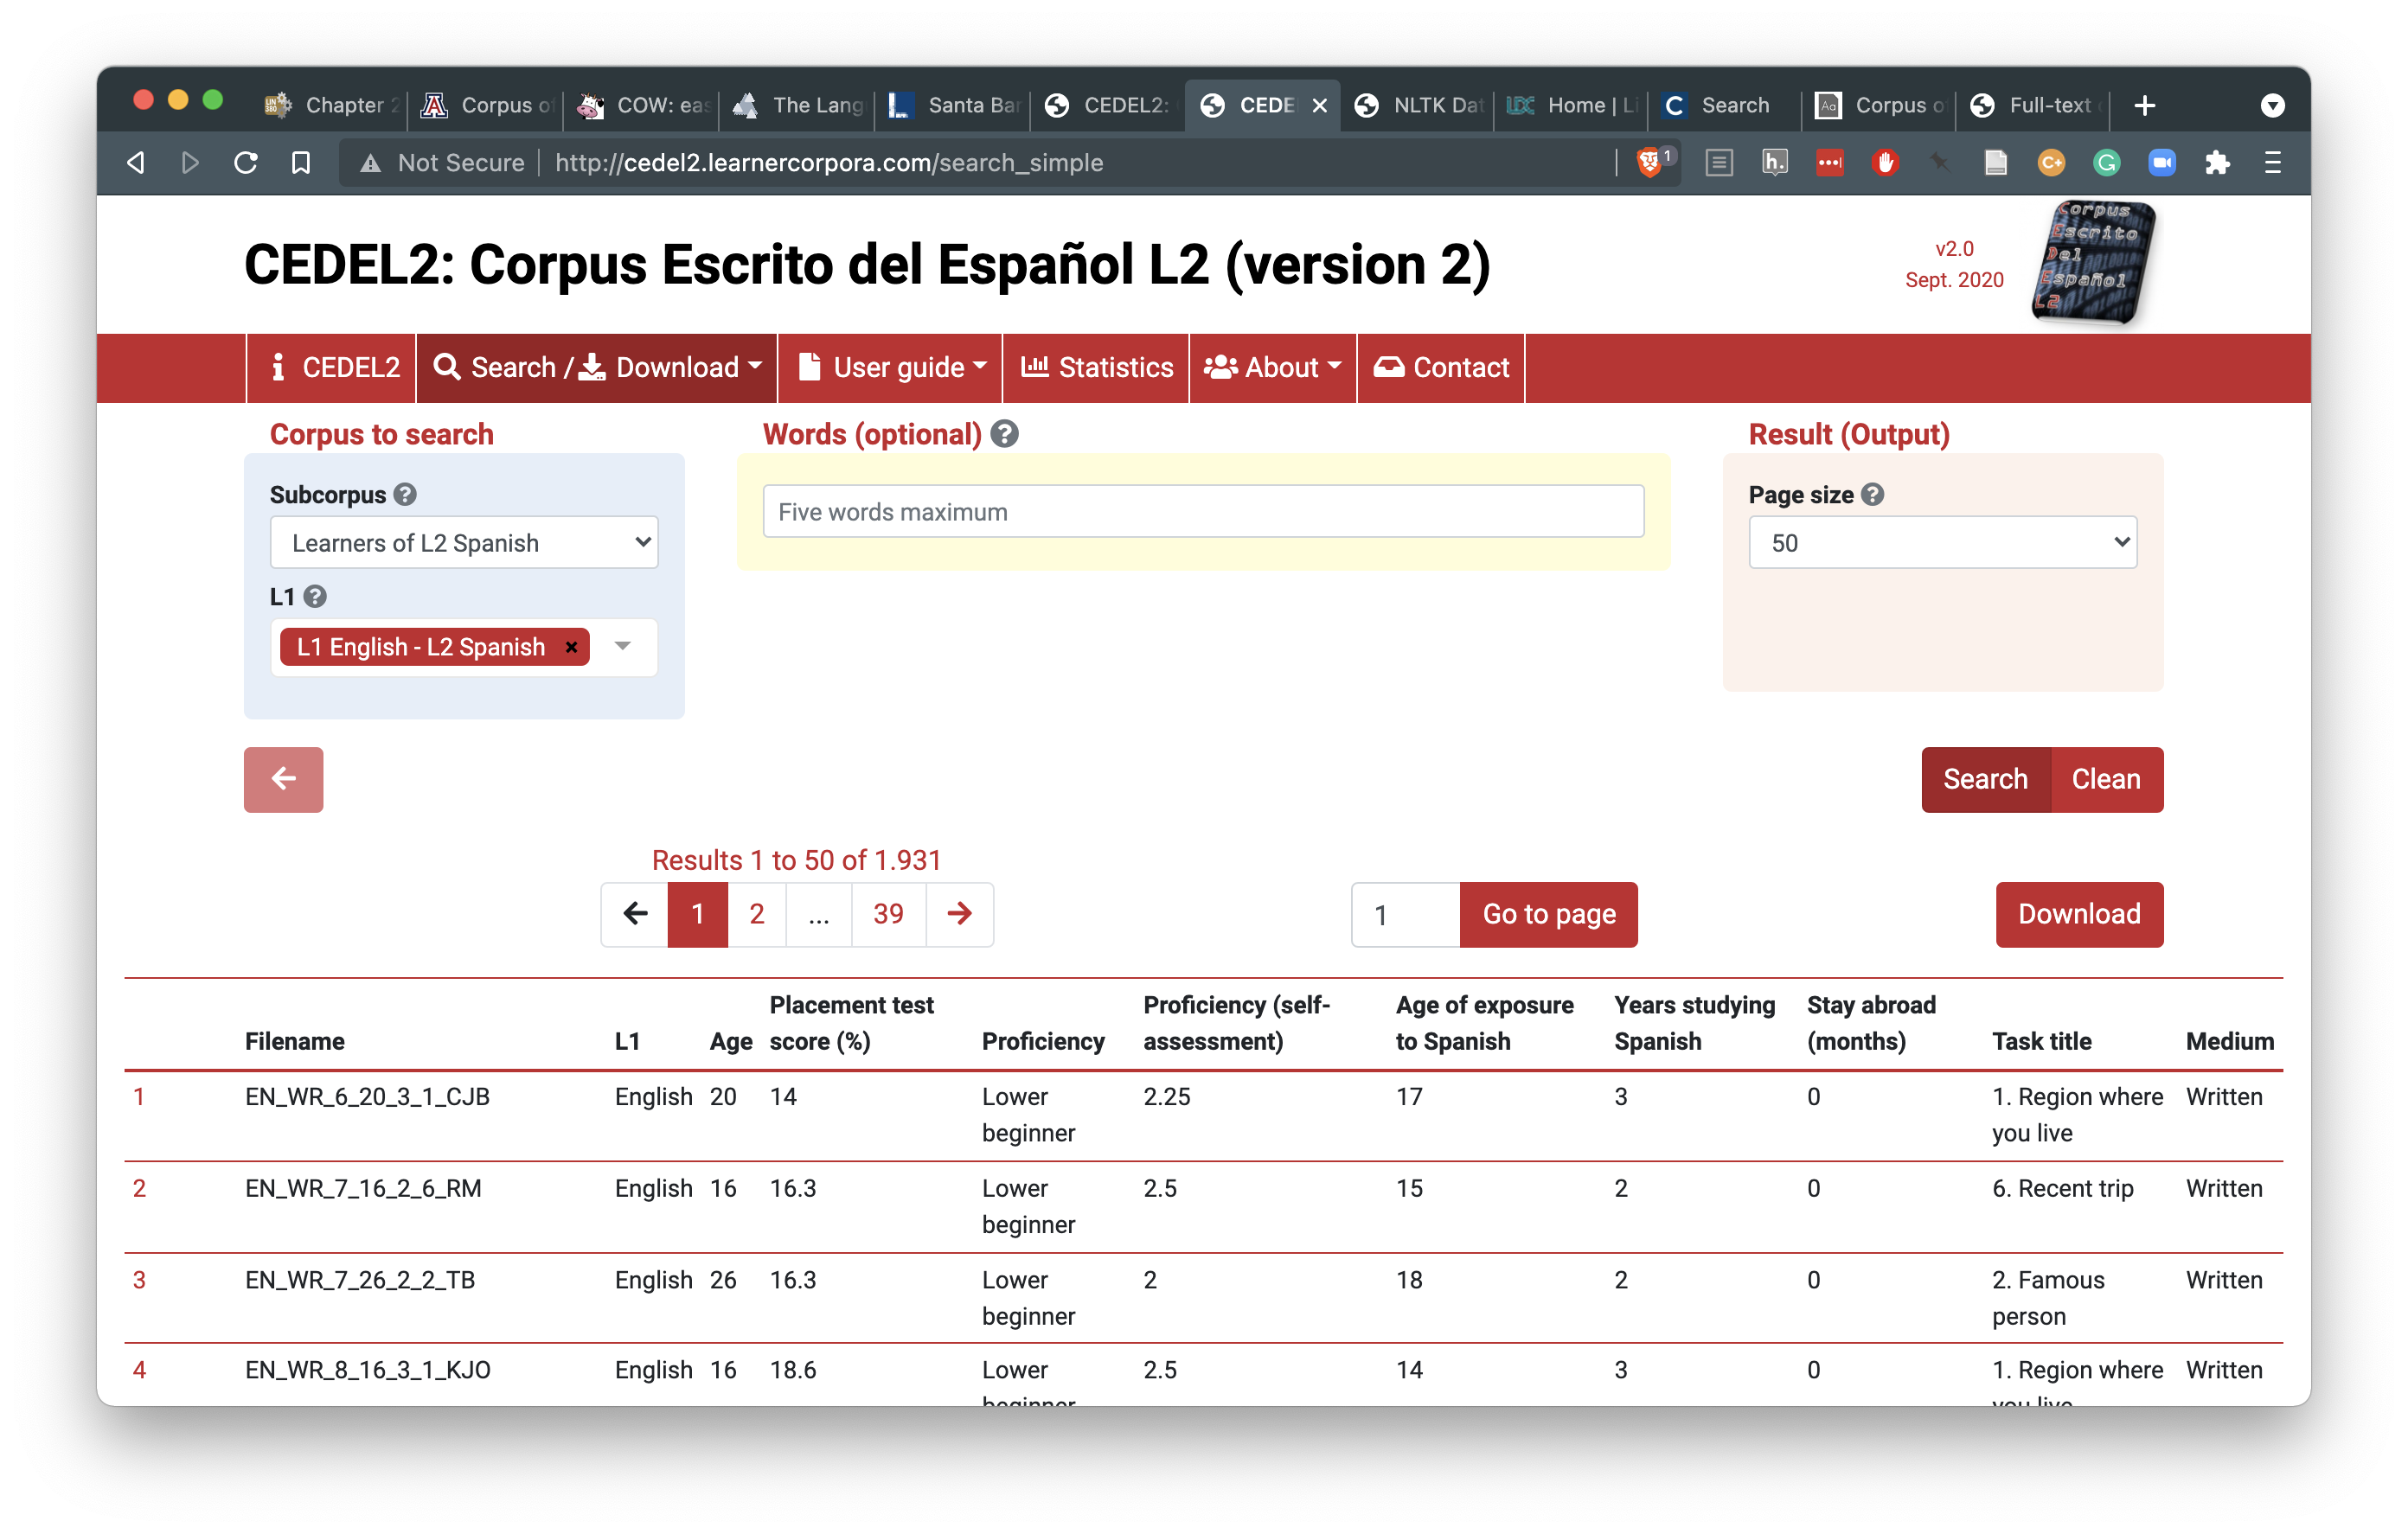 Search and download interface for the CEDEL2 Corpus